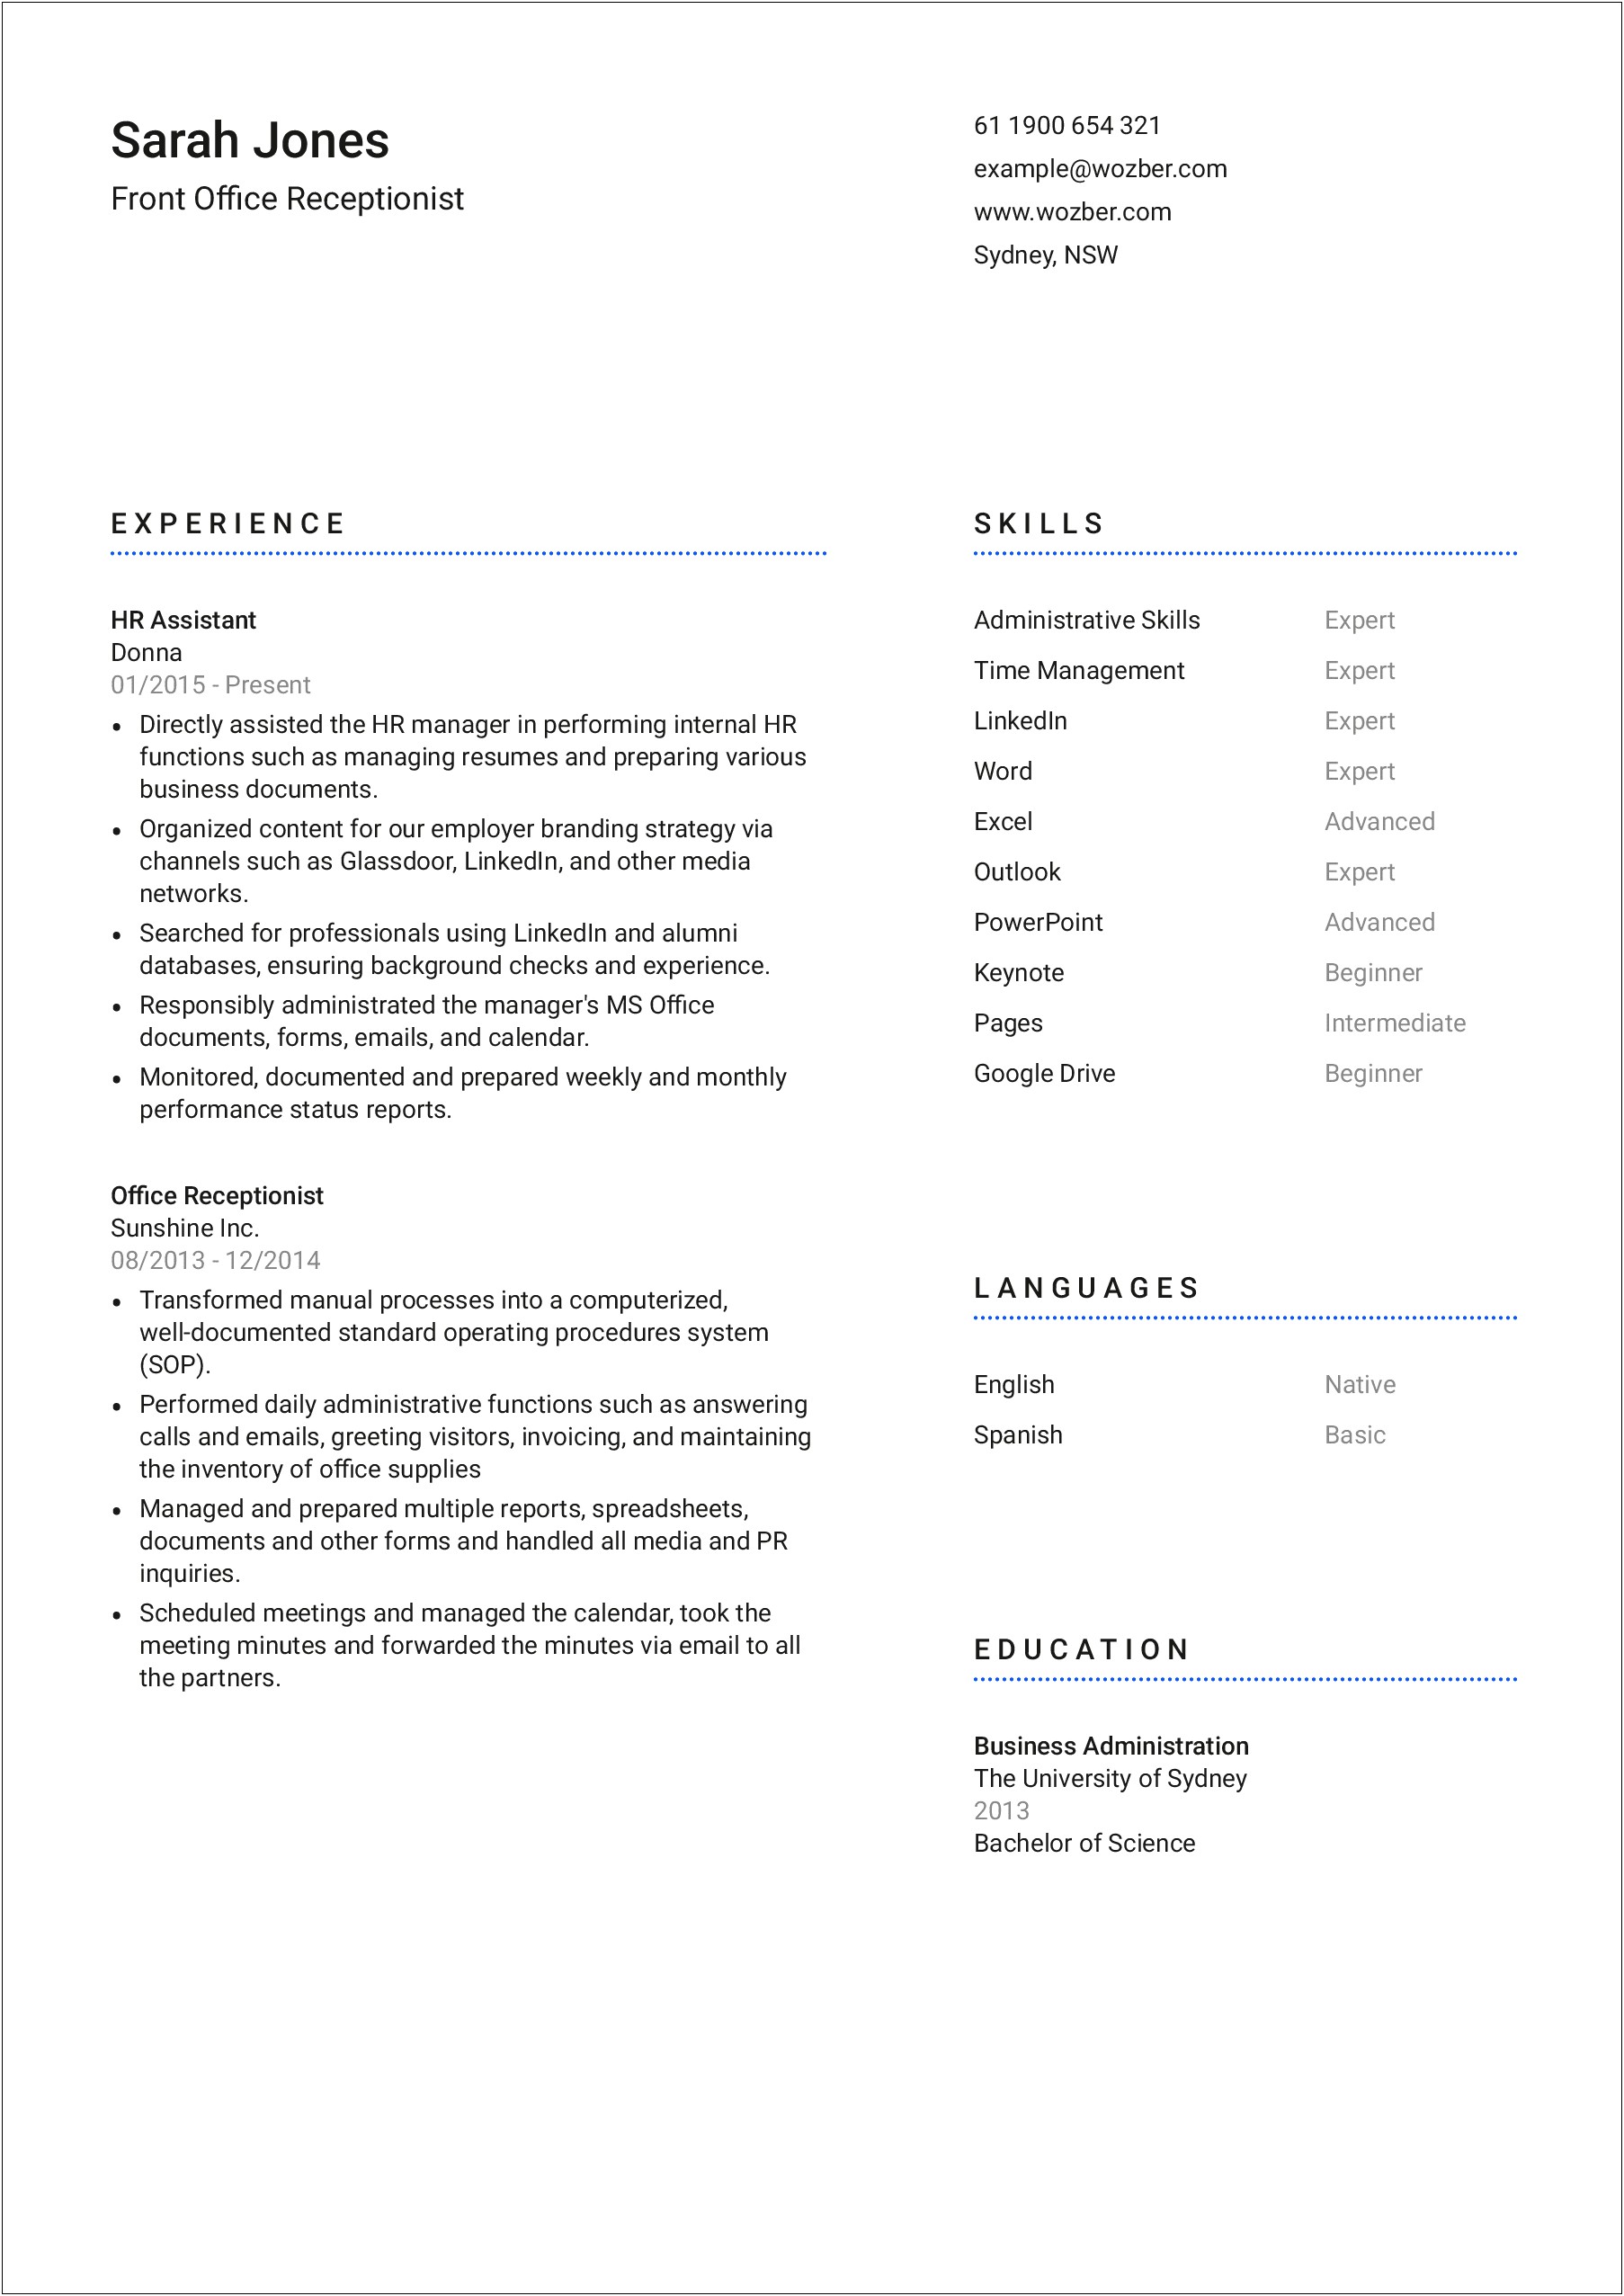 Examples Of Accomplishment Statements For Resumes